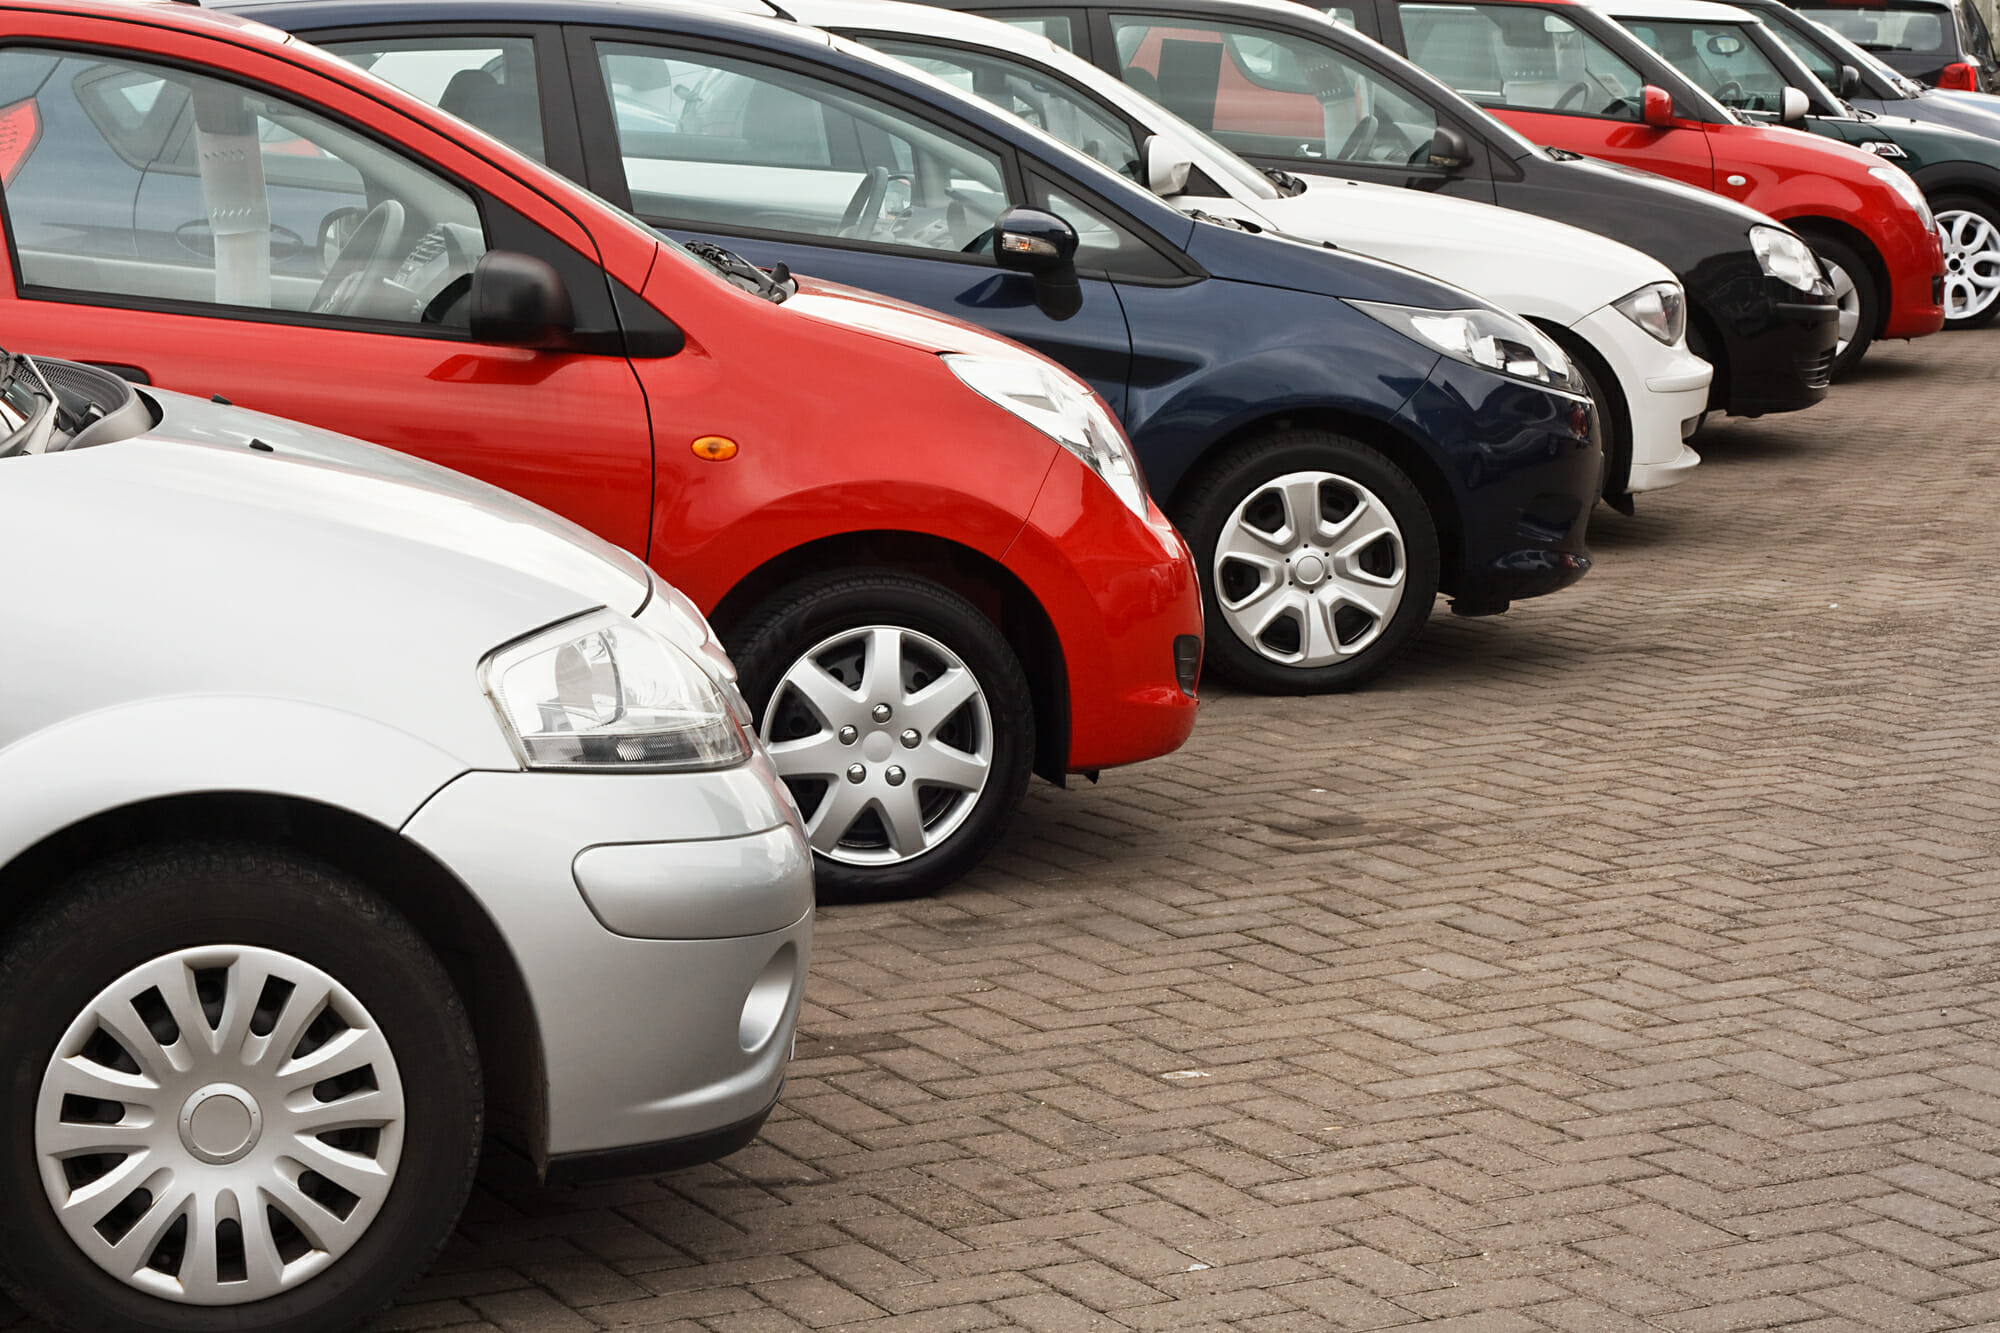 What Is a Good Deal When Buying a Used Car? (How to Buy a Used Car)